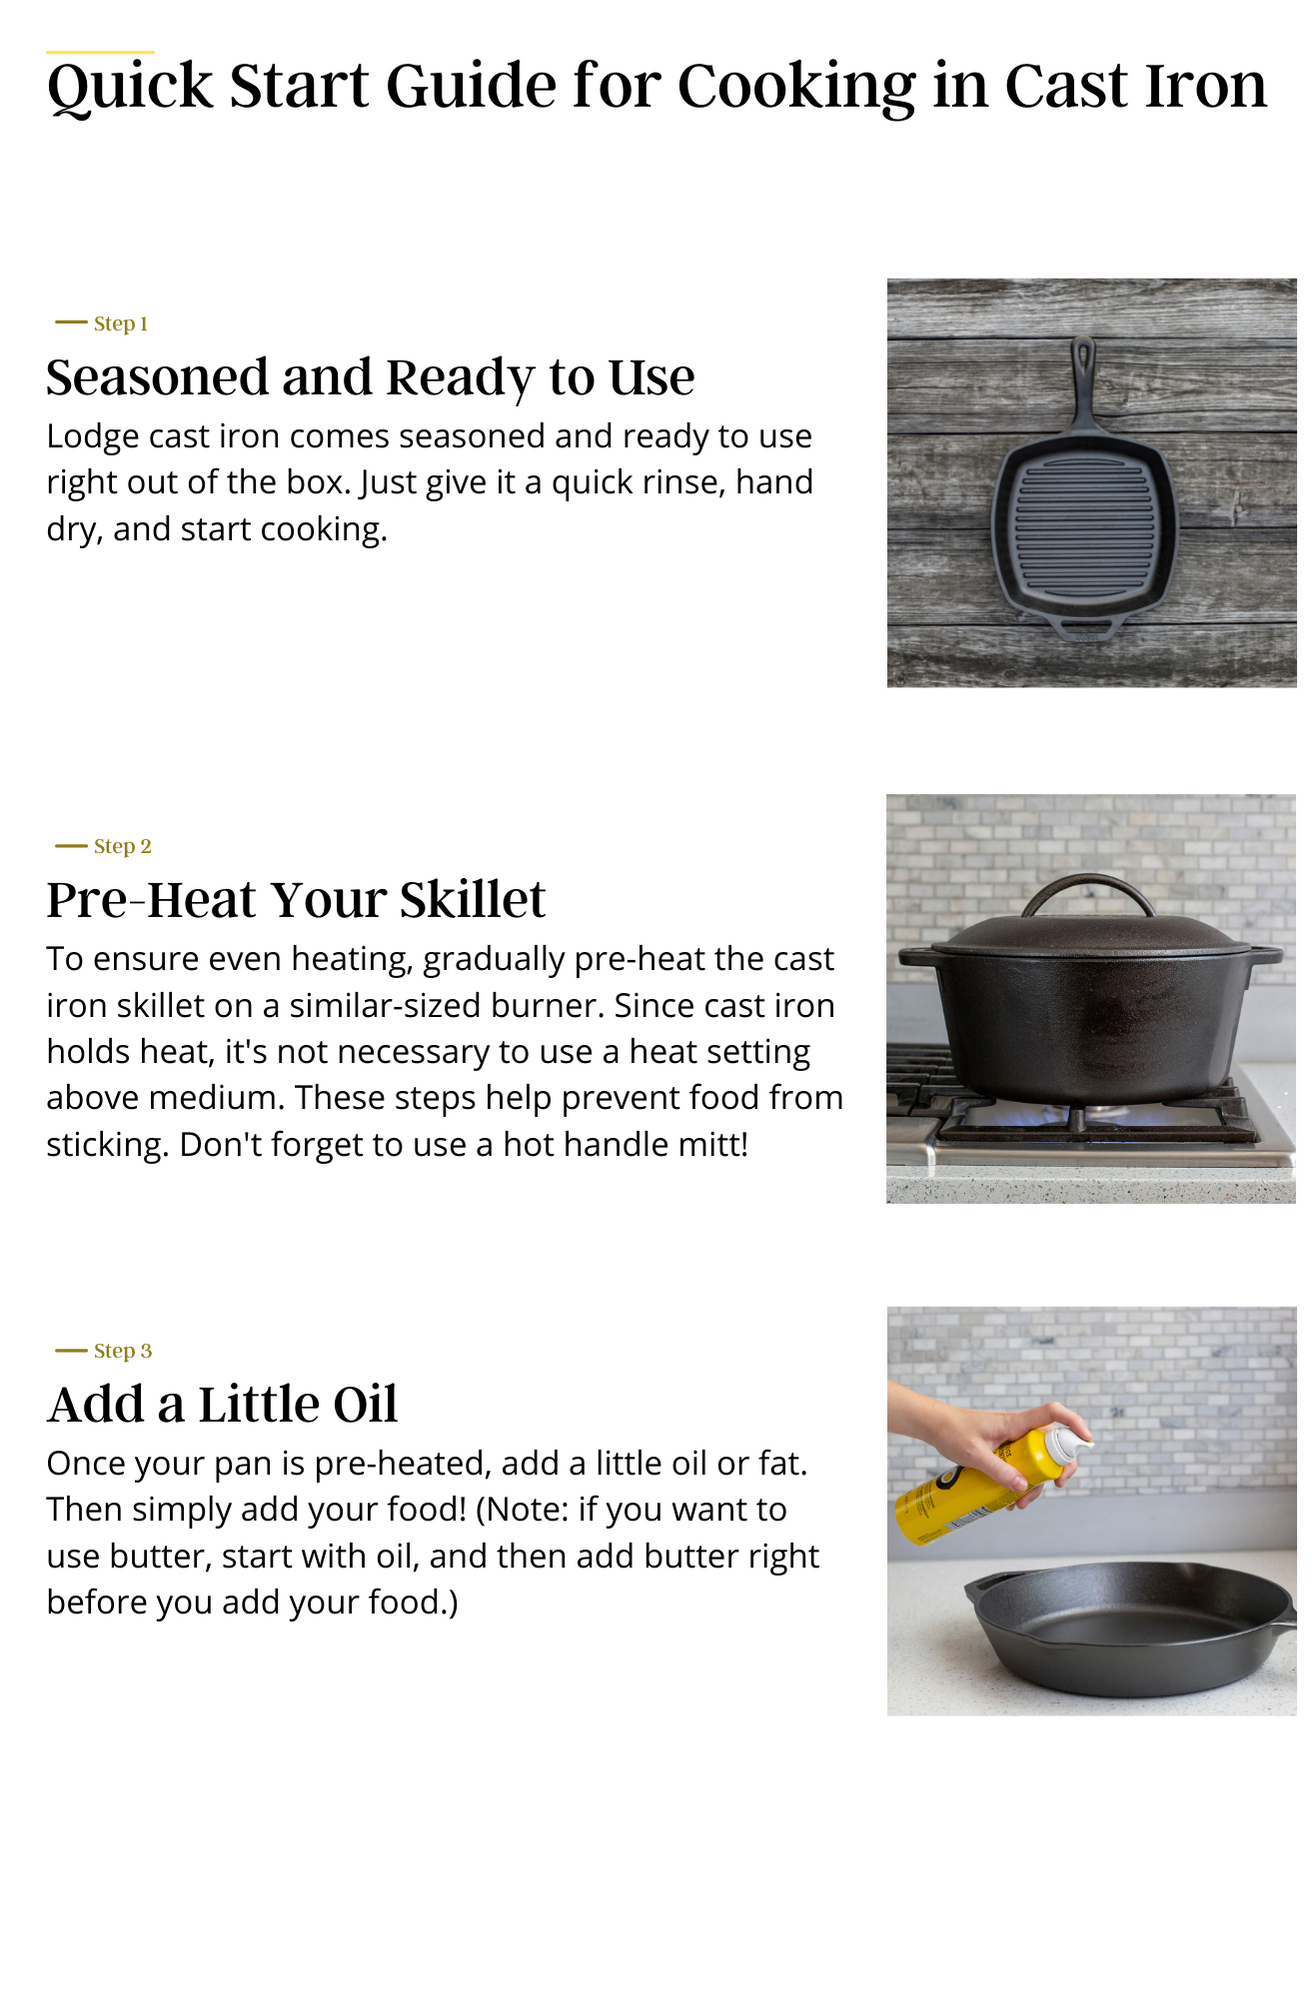 quick-start-guide-for-cooking-in-cast-iron-final.png